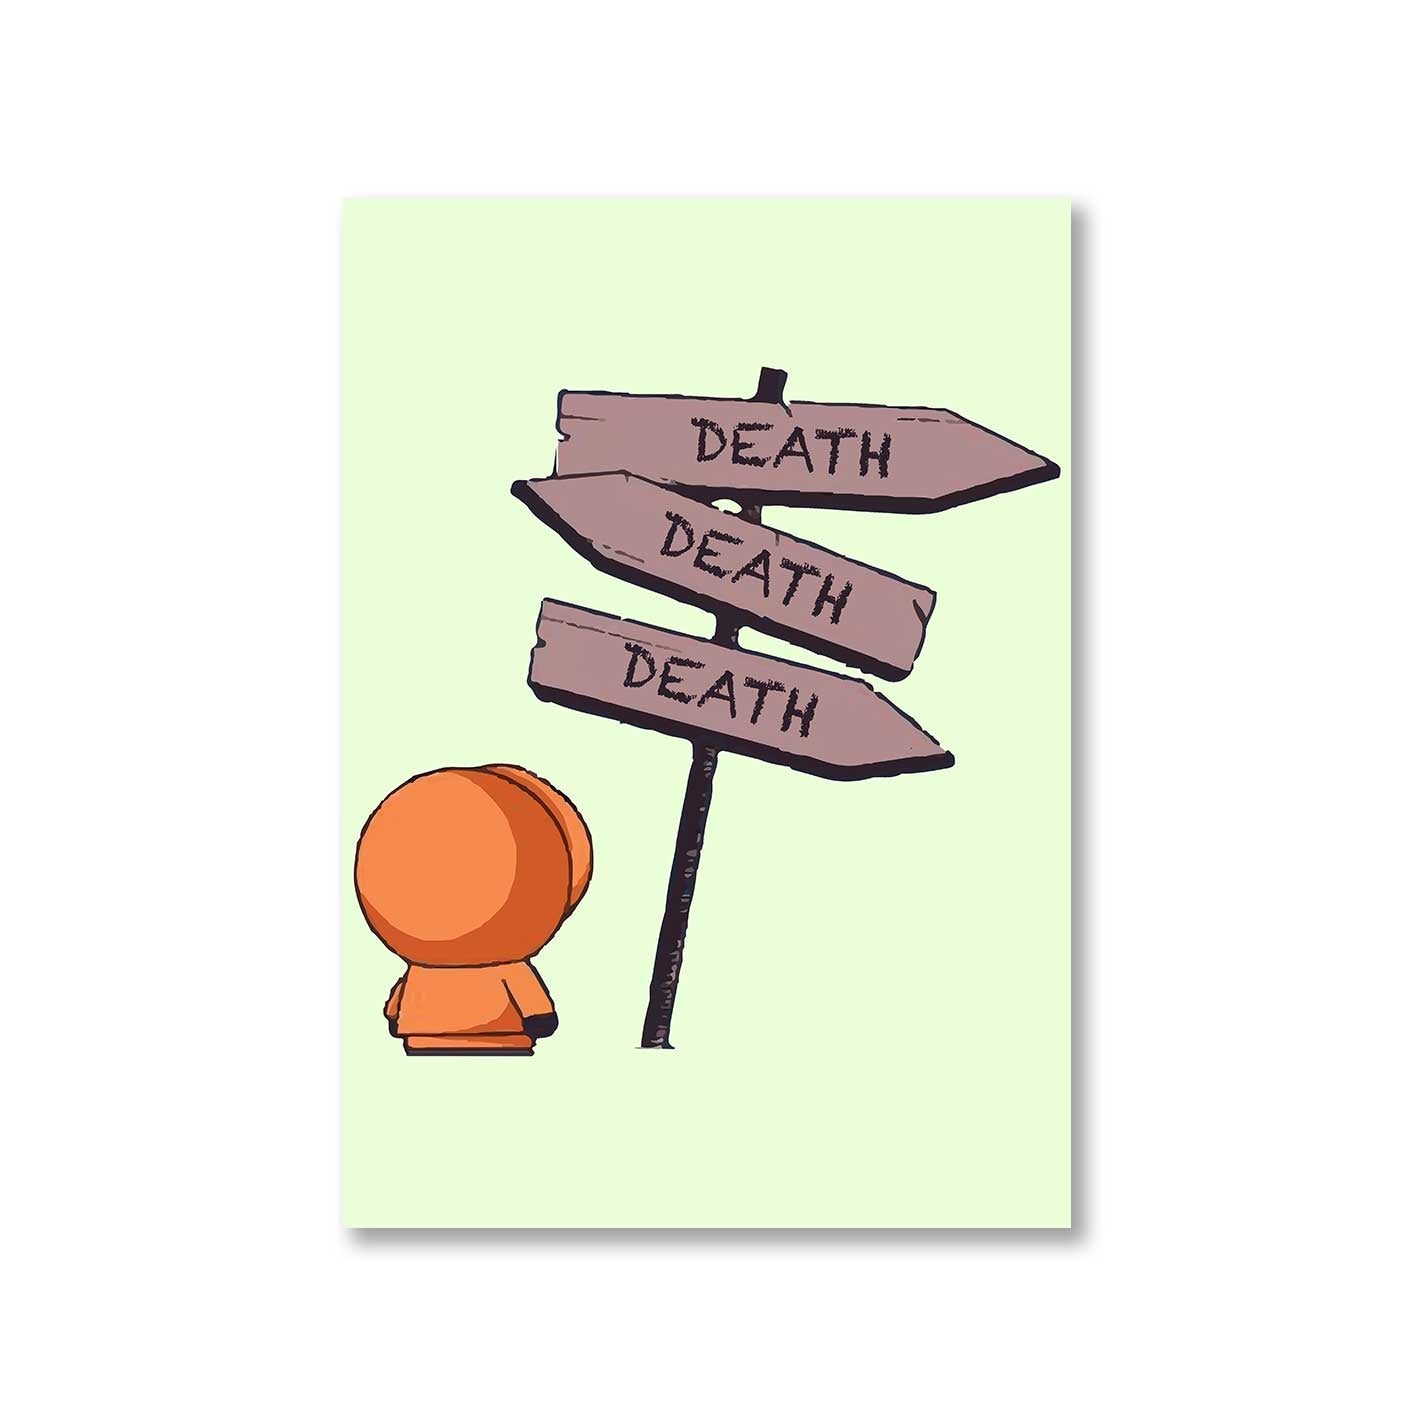 south park the deadly signboard poster wall art buy online india the banyan tee tbt a4 south park kenny cartman stan kyle cartoon character illustration